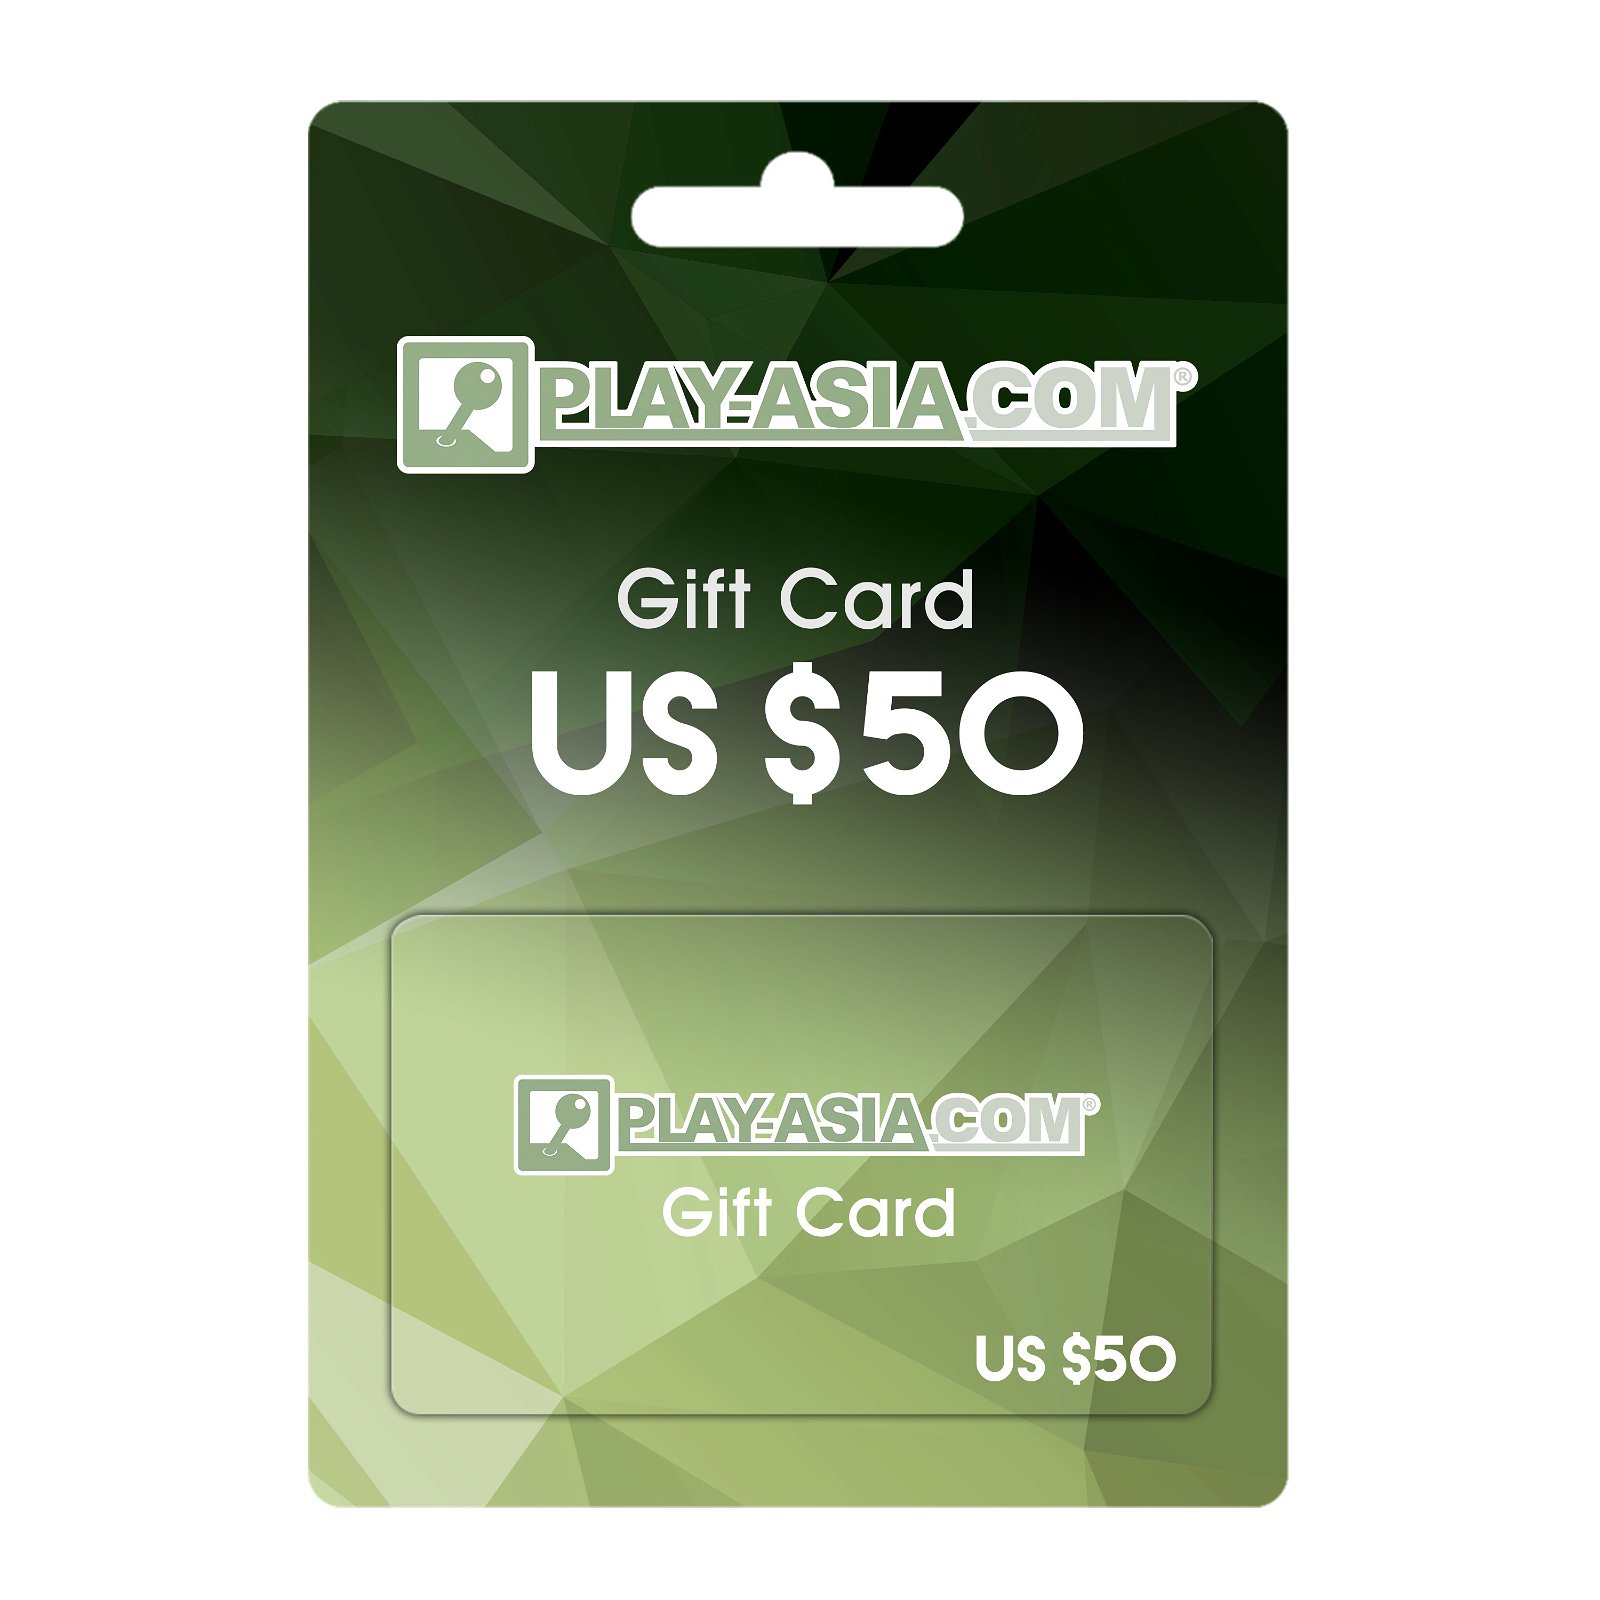 Play-Asia.com Gift Card